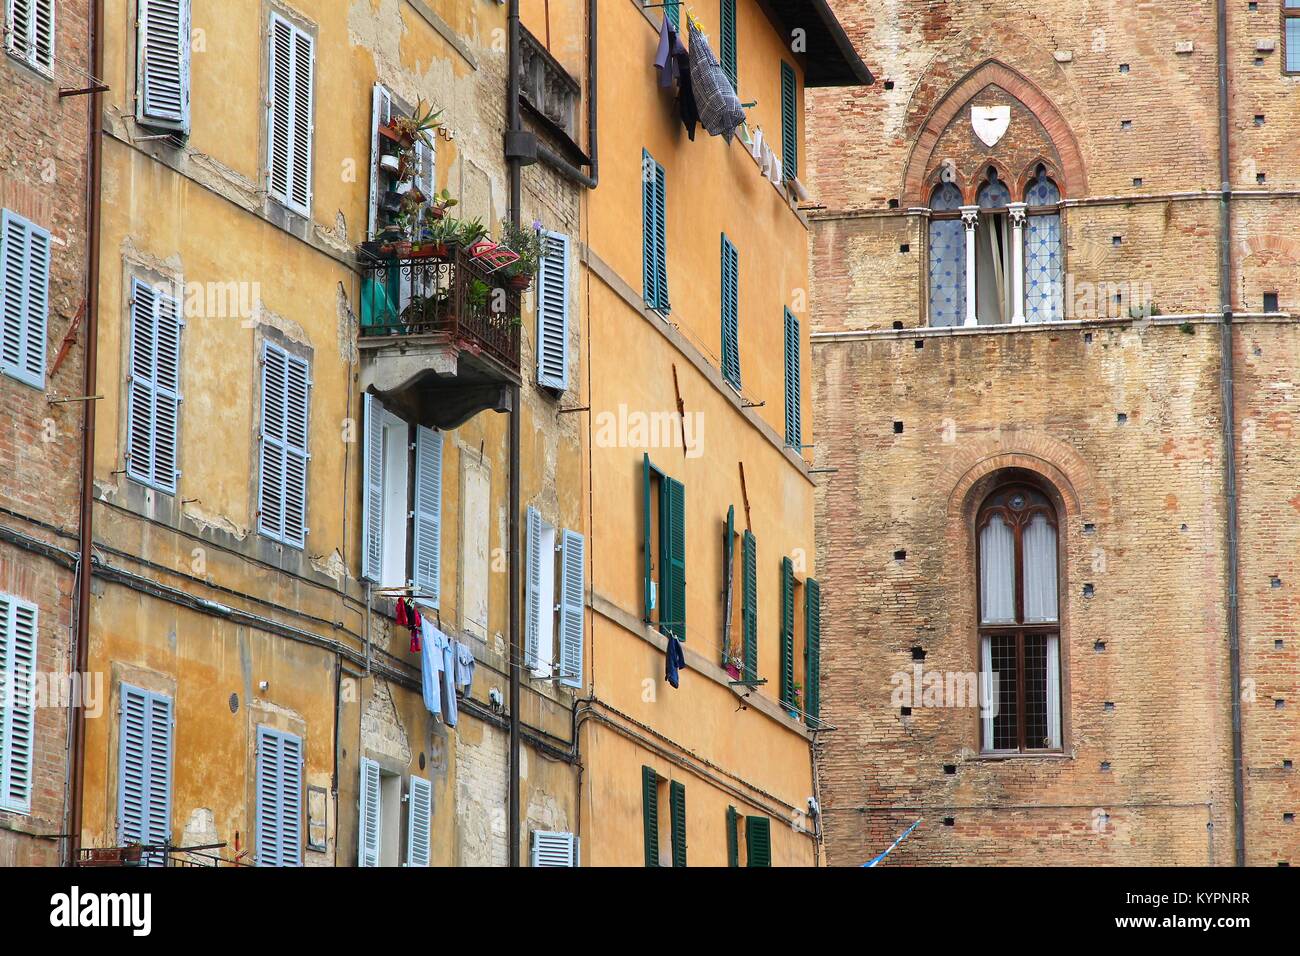 Siena, Italy - medieval town of Tuscany. Old town architecture. Stock Photo